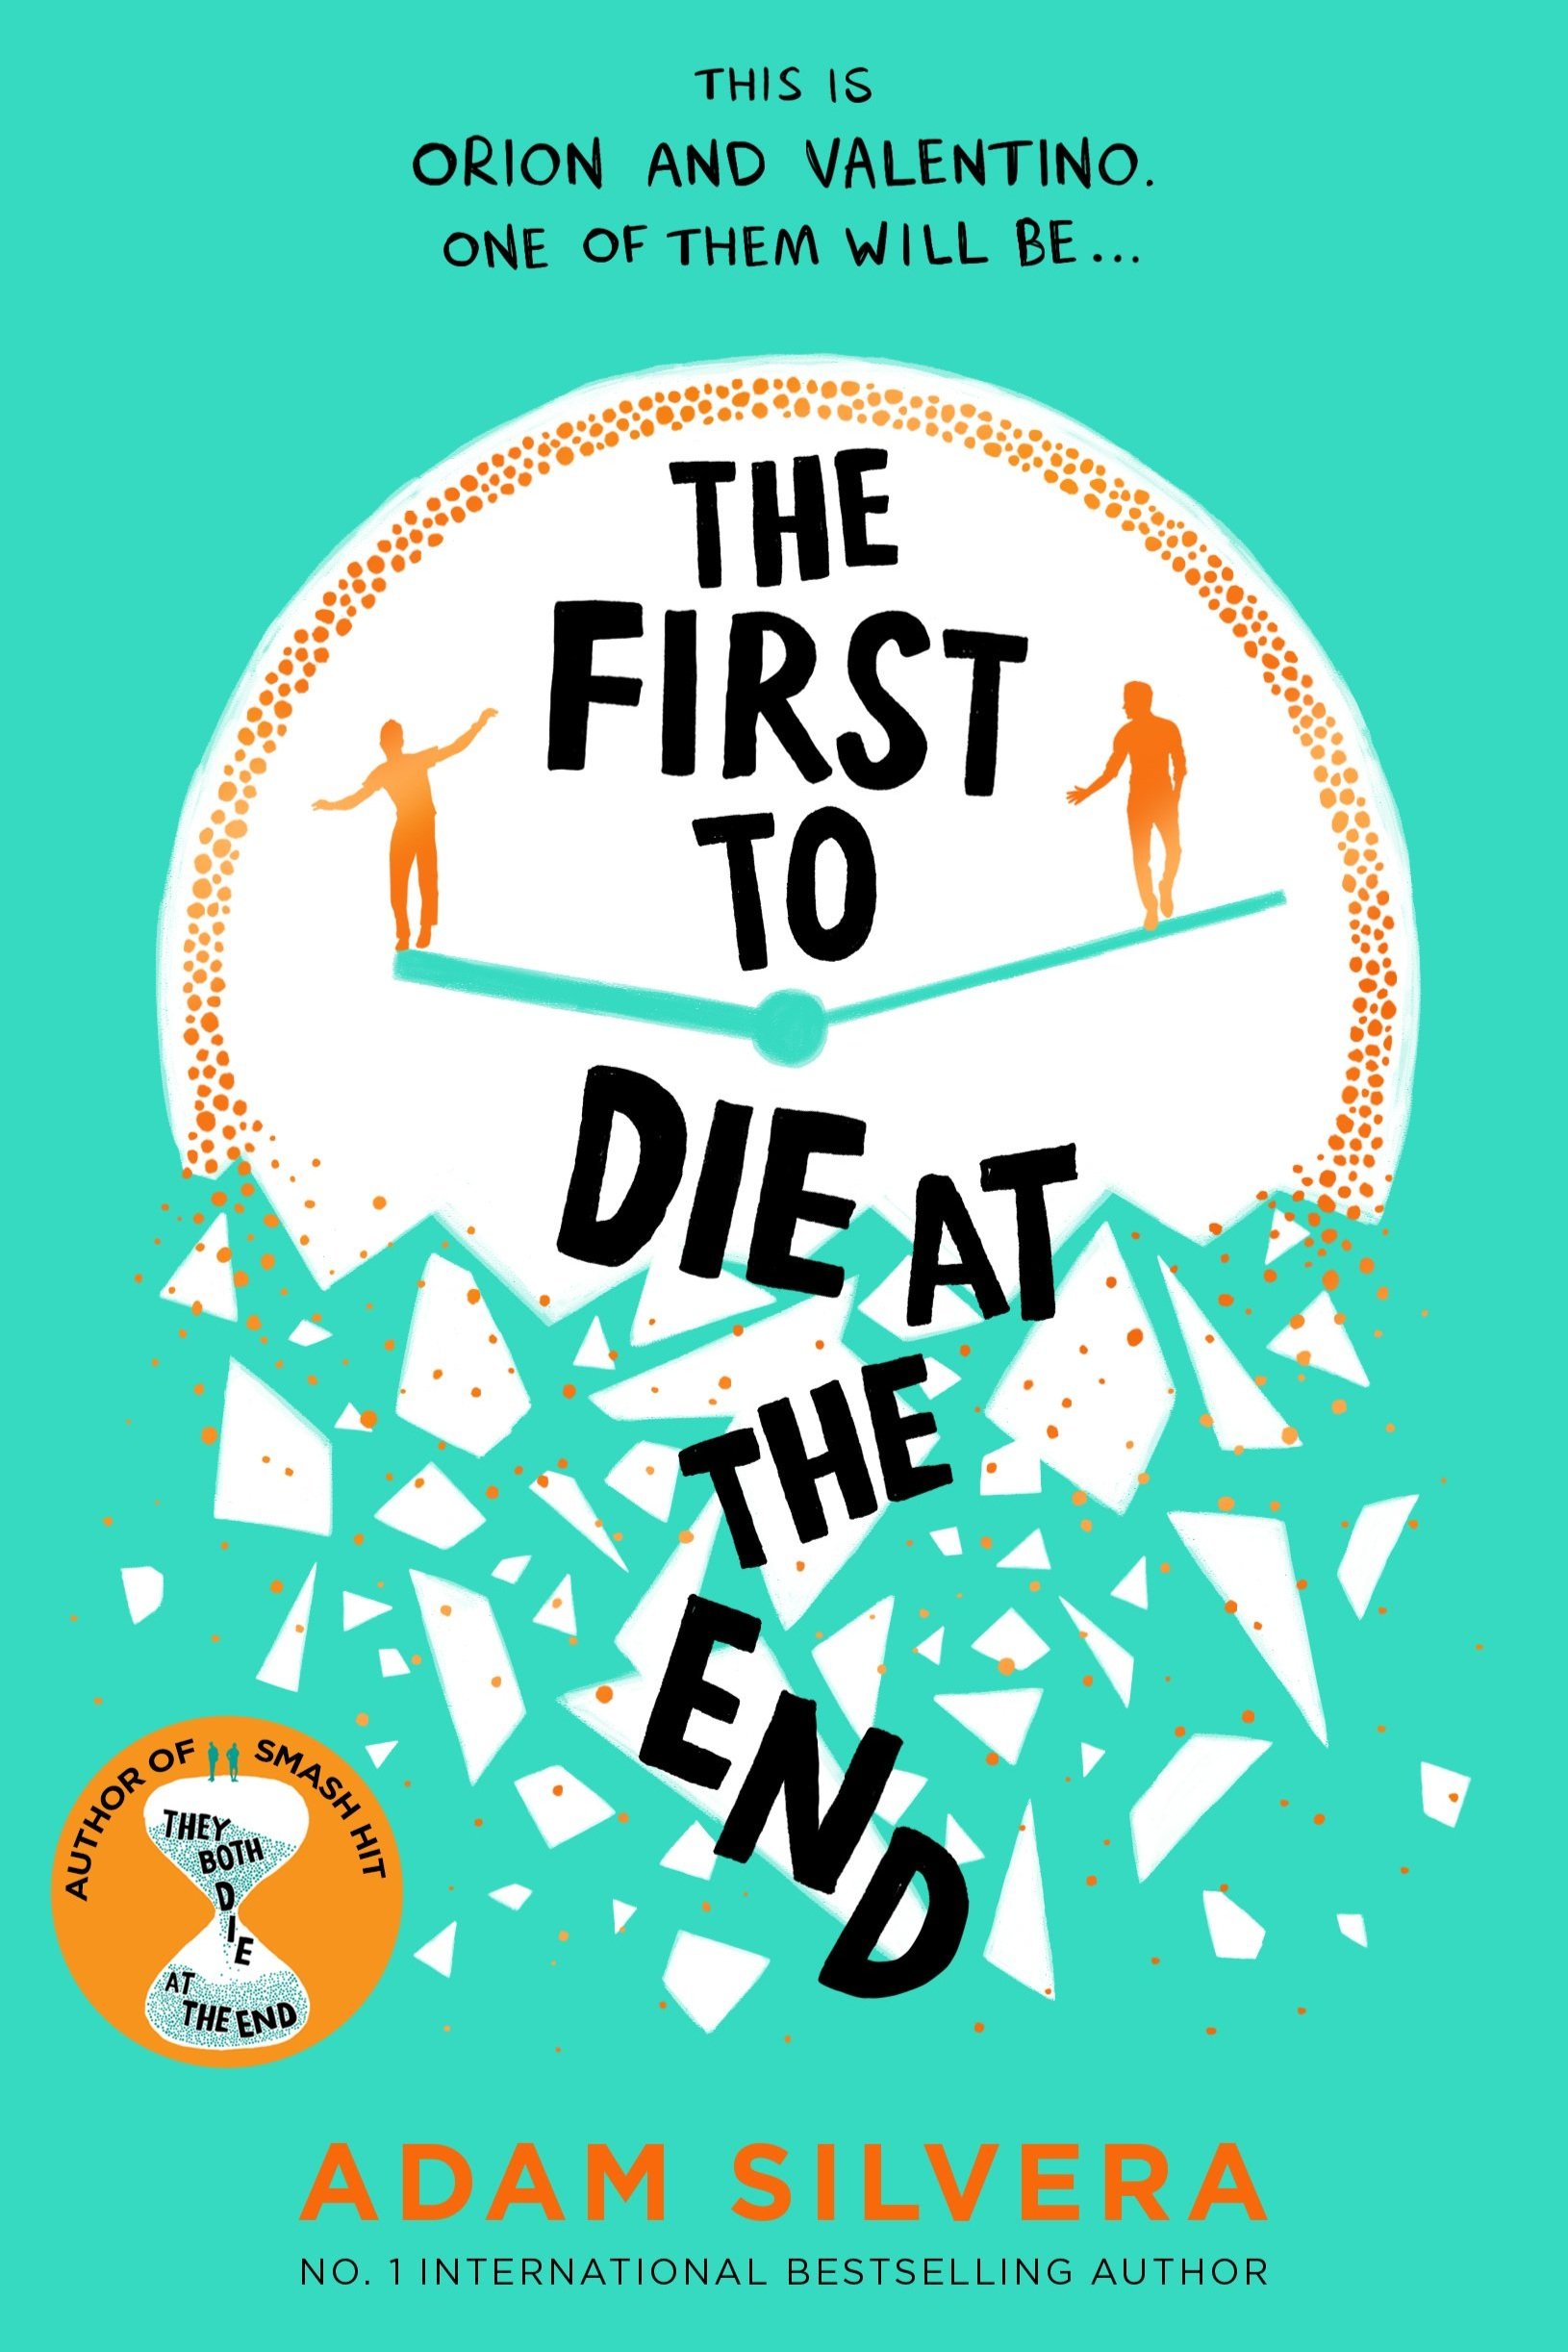 THE FIRST TO DIE AT THE END — ADAM SILVERA